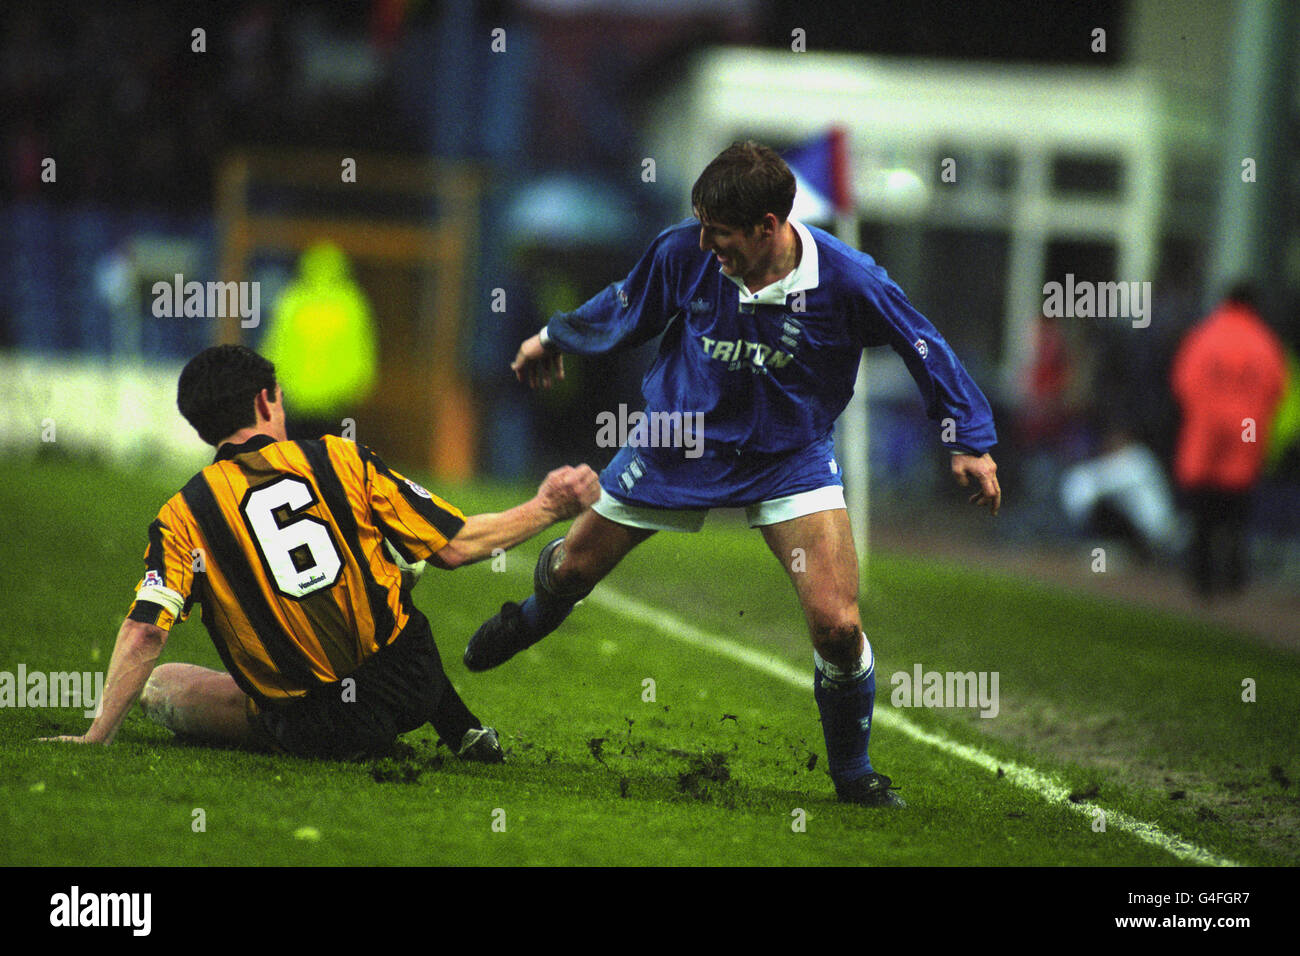 Soccer - Endsleigh League Division Two - Birmingham City v Cambridge United - St Andrew's Stock Photo